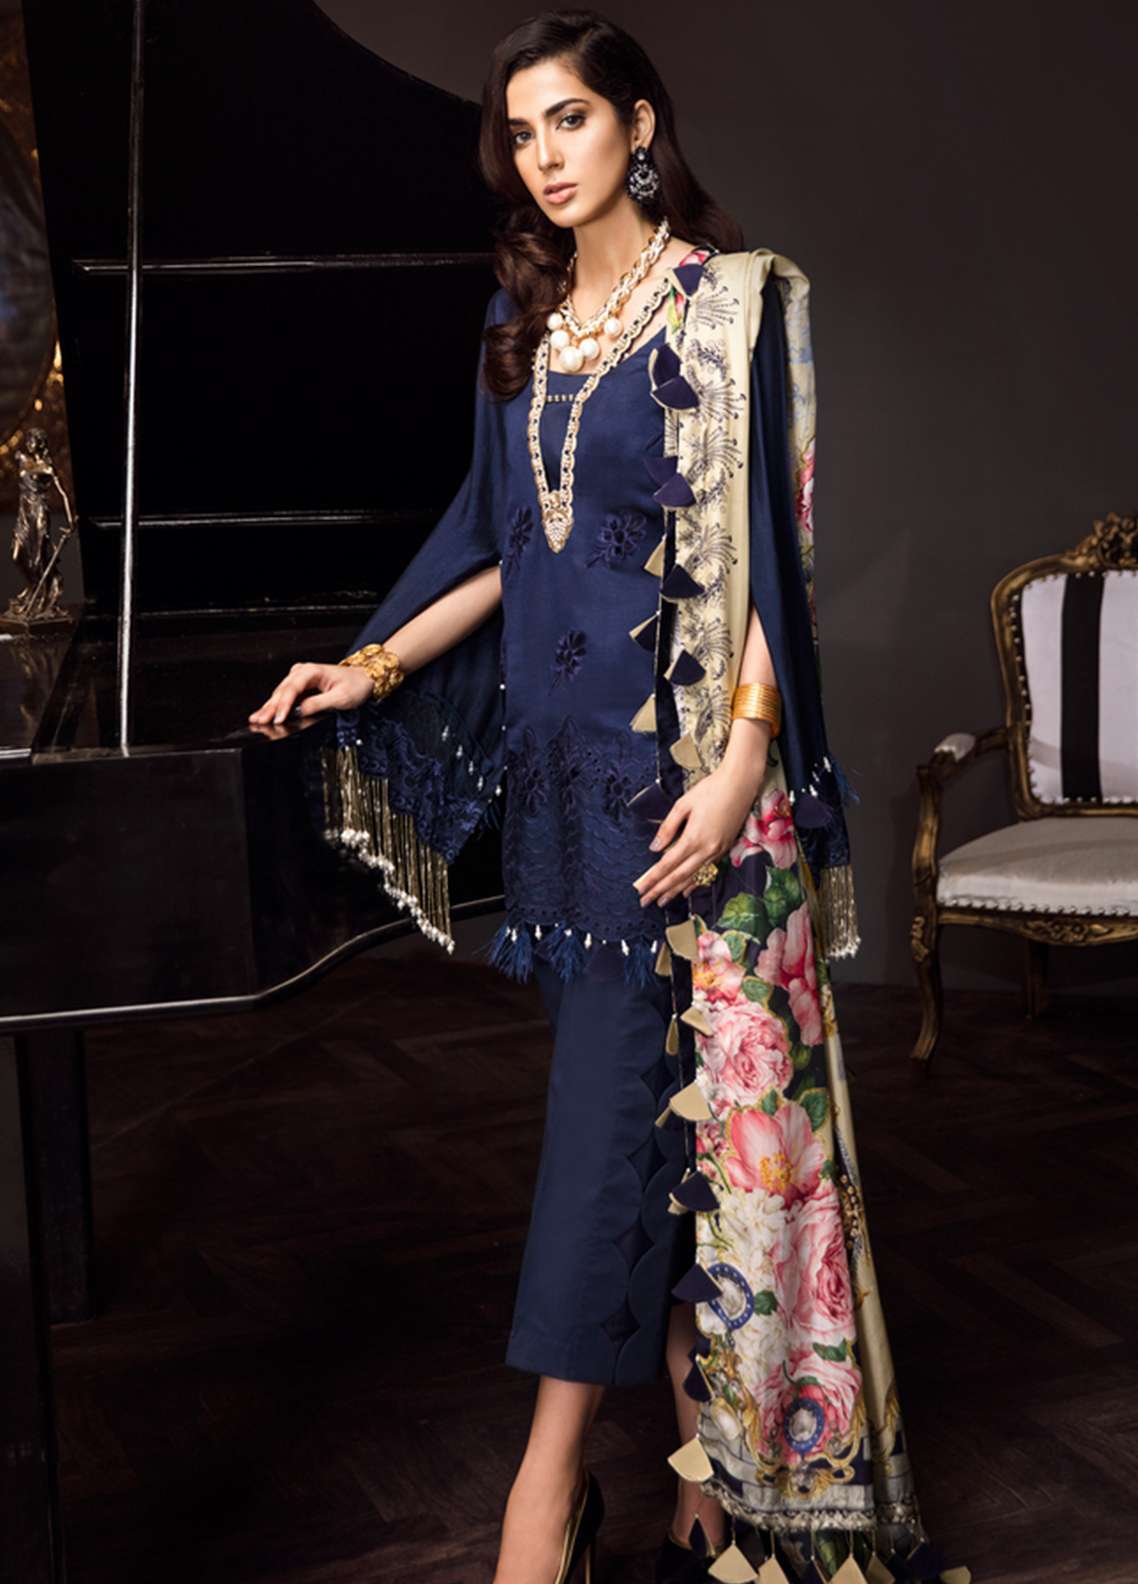 Noor by Sadia Asad  Embroidered Formal Eid Lawn Unstitched 3 Piece Suit - 09 Bejeweled Shappire